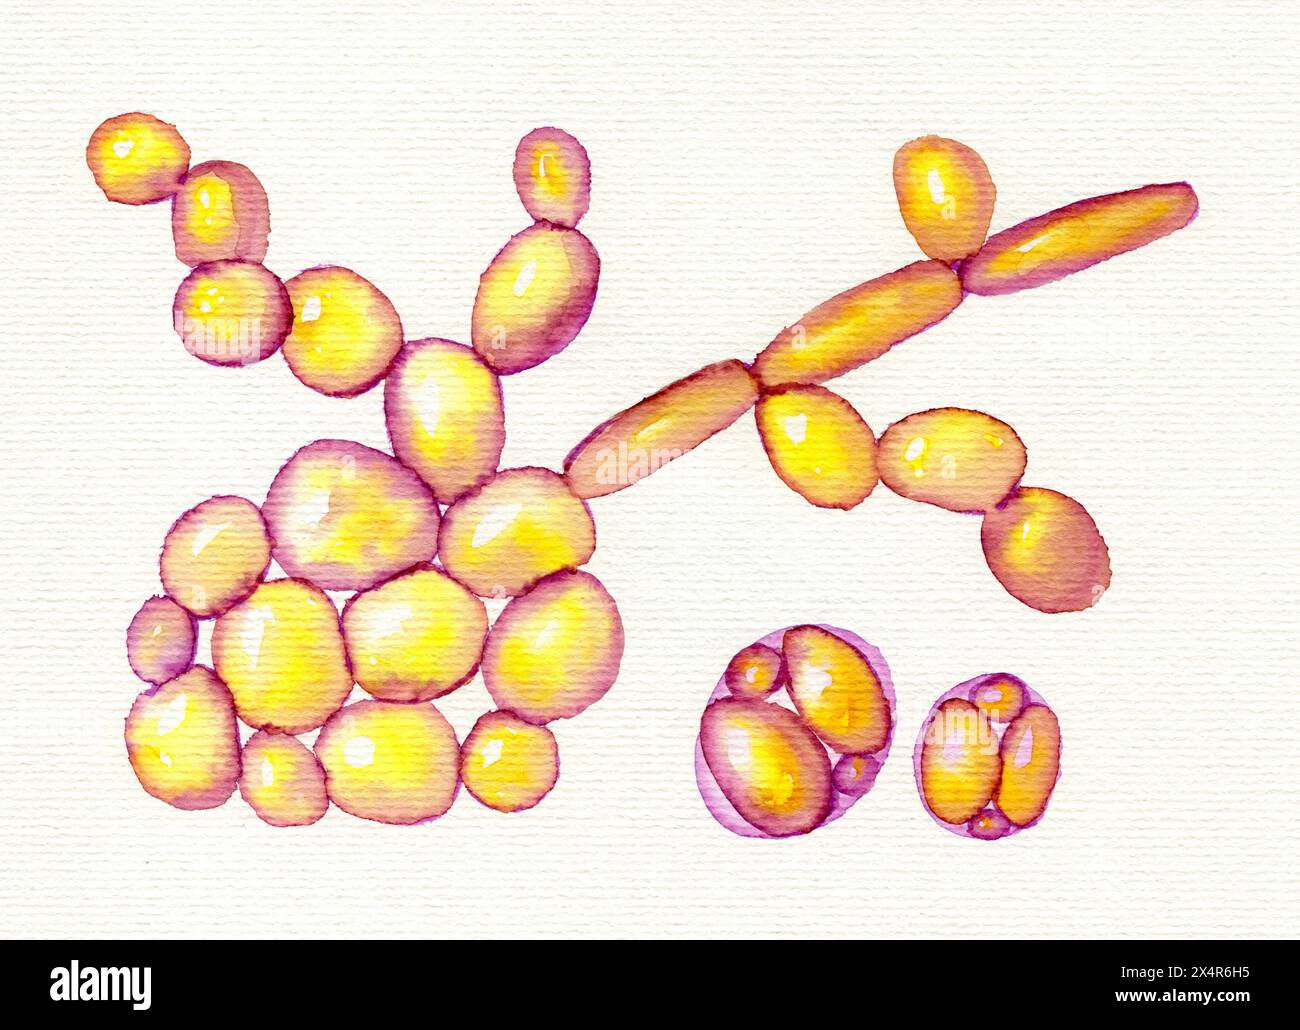 Saccharomyces cerevisiae yeasts, illustration. Baker's or brewer's yeast, probiotics restoring normal flora of intestine. Stock Photo